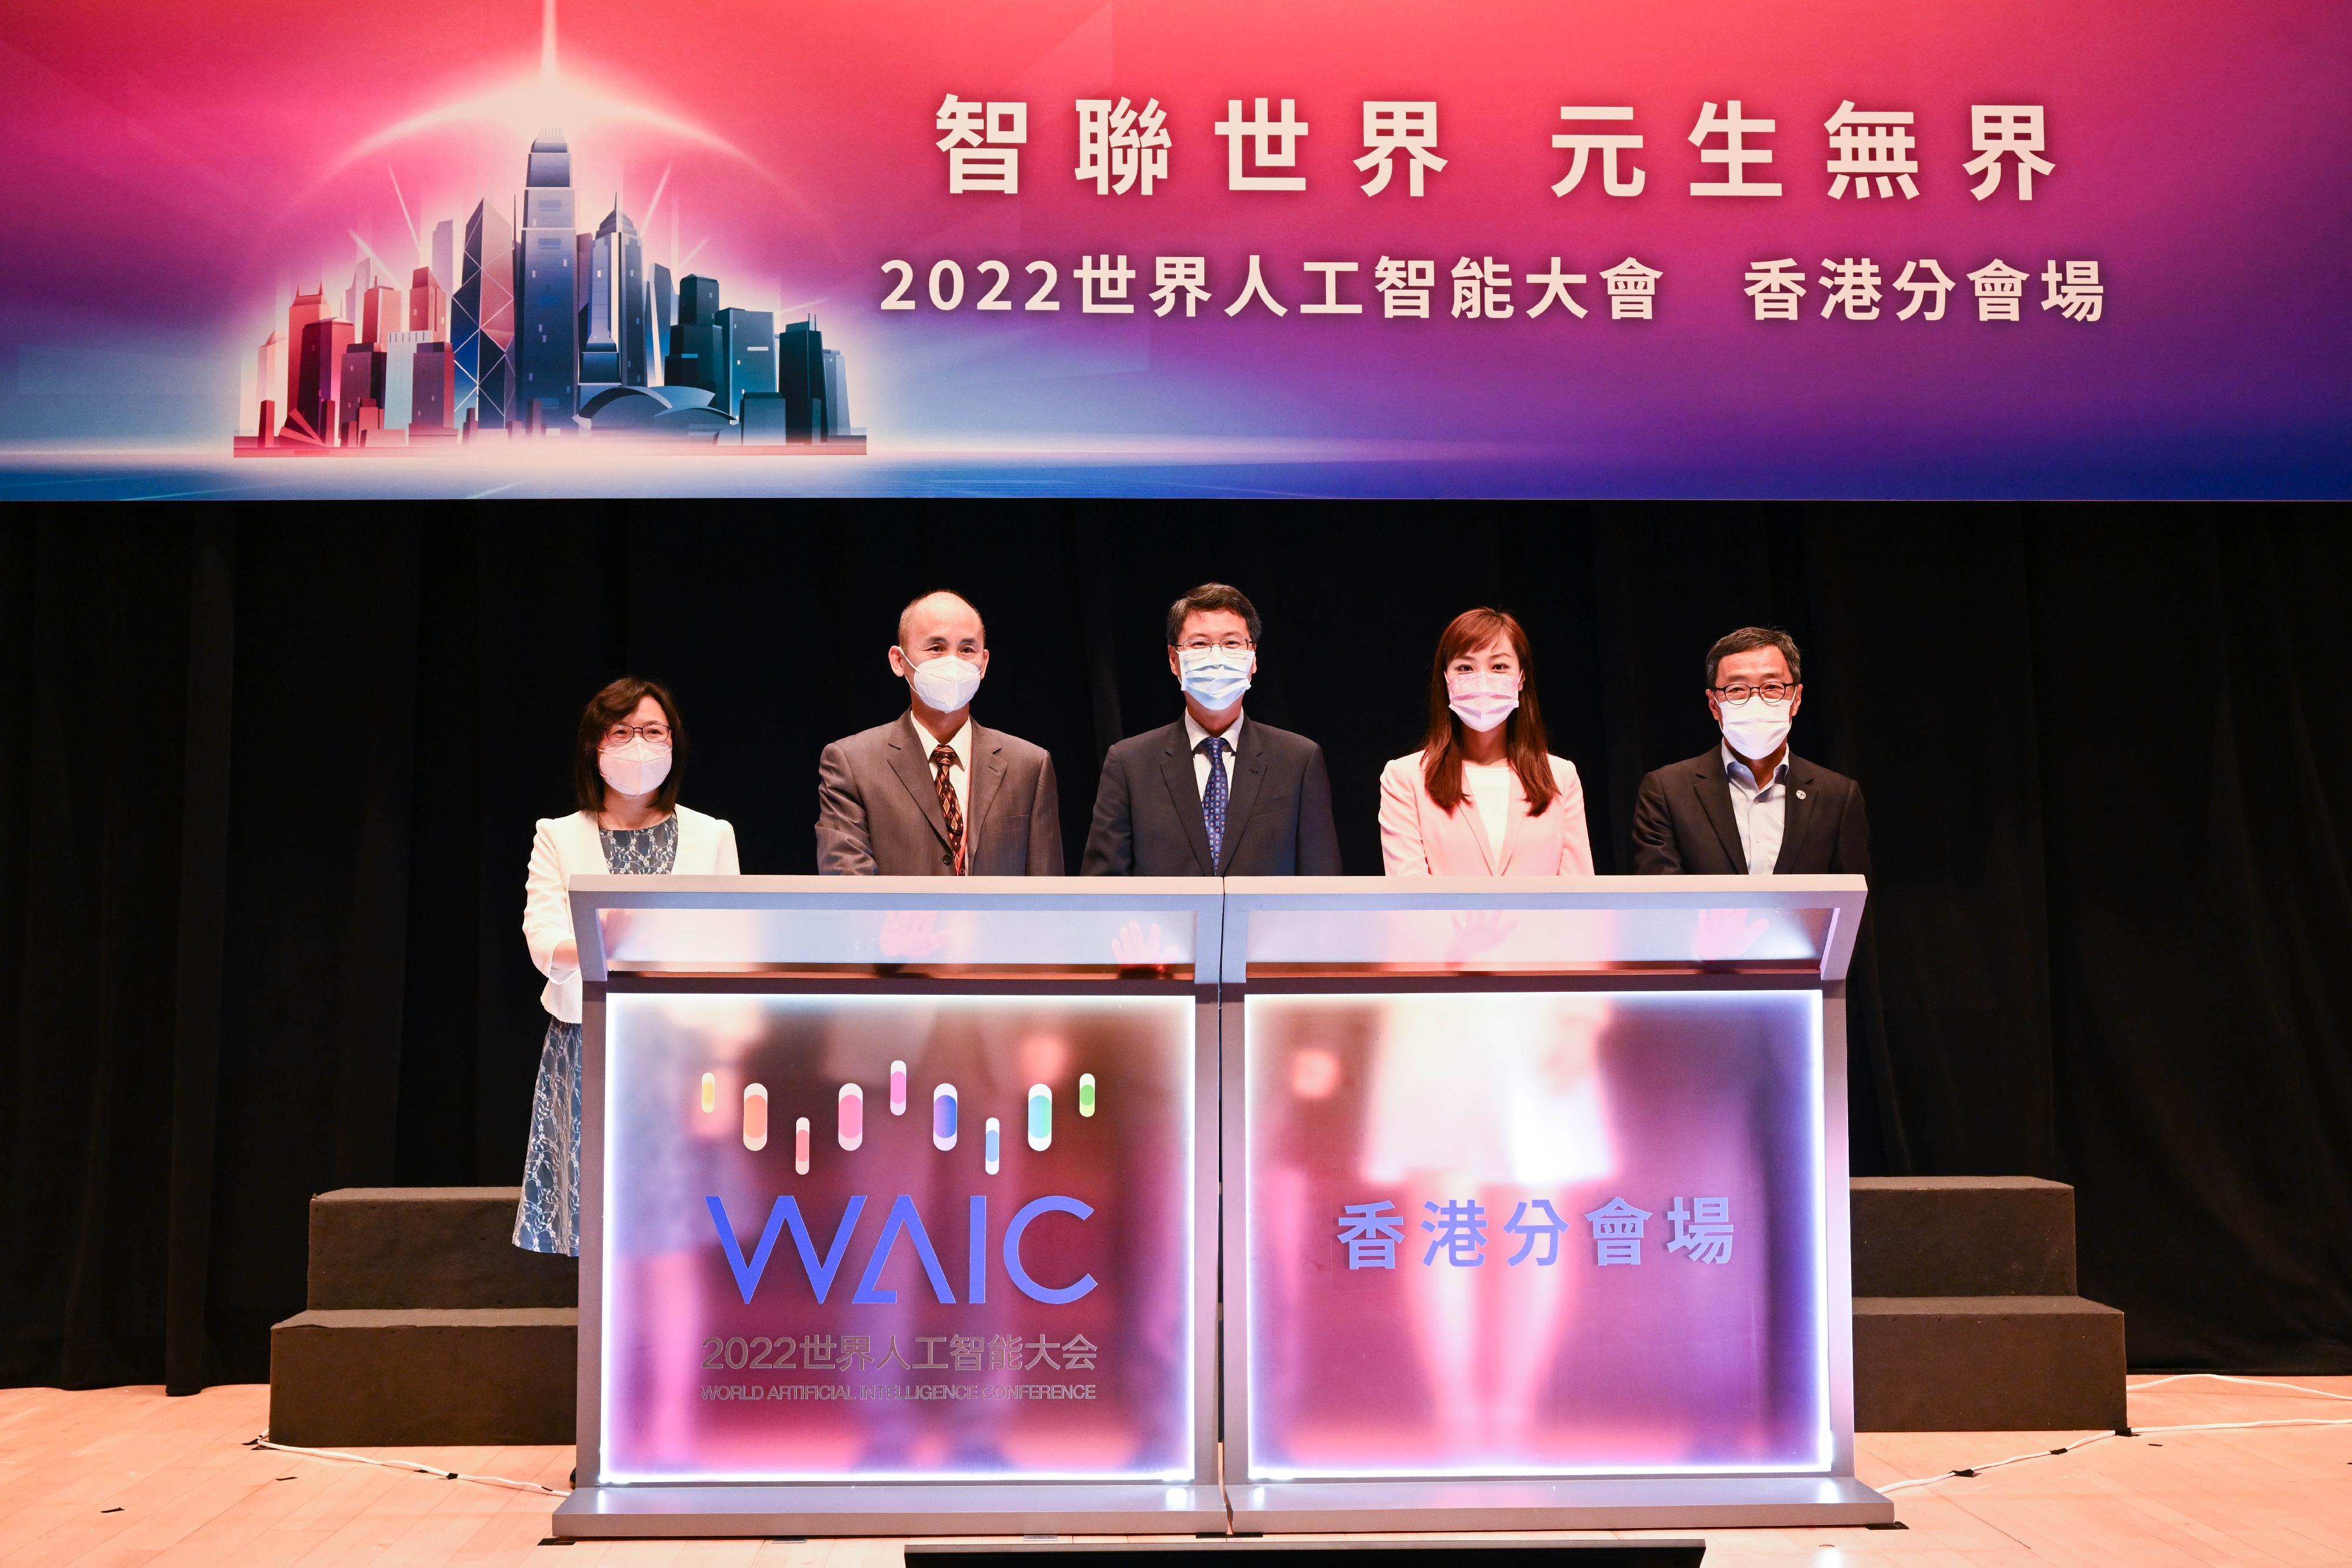 The World Artificial Intelligence Conference 2022 - Hong Kong Branch was held at the Charles K Kao Auditorium of the Hong Kong Science Park, Sha Tin, today (September 1). Officiating guests included the Permanent Secretary for Innovation, Technology and Industry, Mr Eddie Mak (centre); the Under Secretary for Innovation, Technology and Industry, Ms Lillian Cheong (second right); the inspector of the Department of Educational, Scientific and Technological Affairs of the Liaison Office of the Central People's Government in the Hong Kong Special Administrative Region, Mr Liu Maozhou (second left); the Commissioner for Innovation and Technology, Ms Rebecca Pun (first left); and the Chief Executive Officer of the Hong Kong Science and Technology Parks Corporation, Mr Albert Wong (first right).